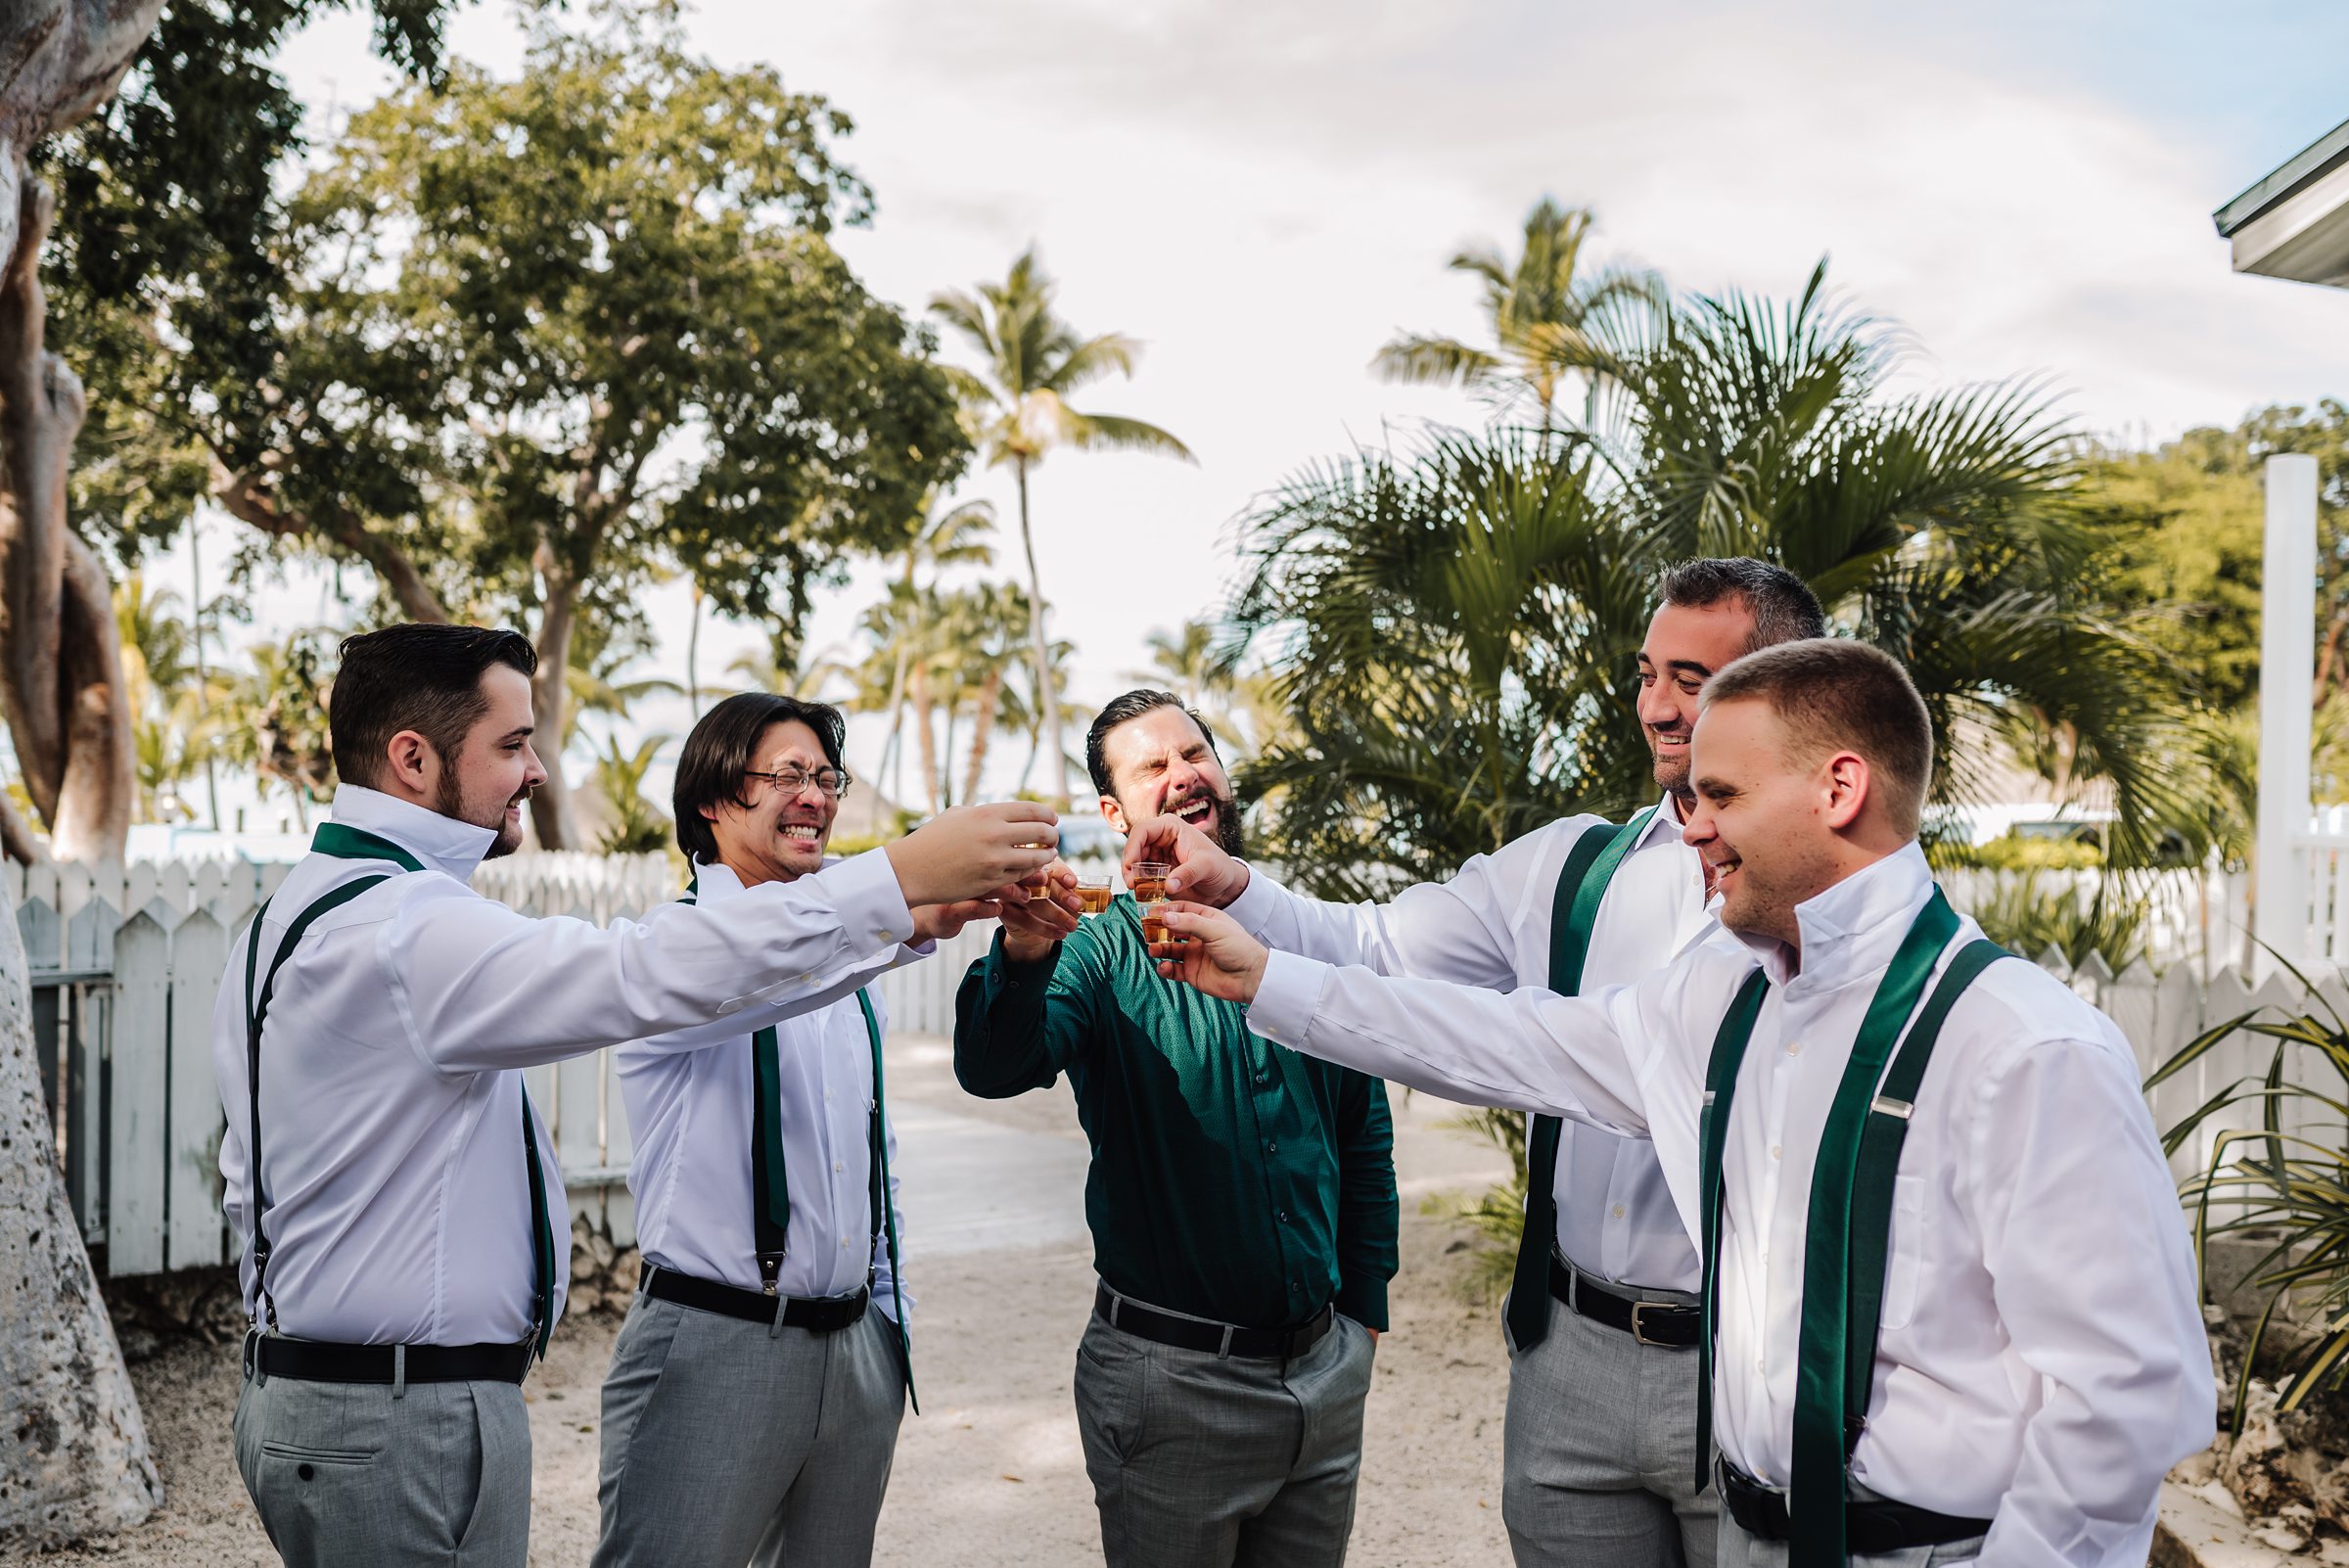 Groomsmen toasting to the happy couple at a beachside wedding location in Key Largo.